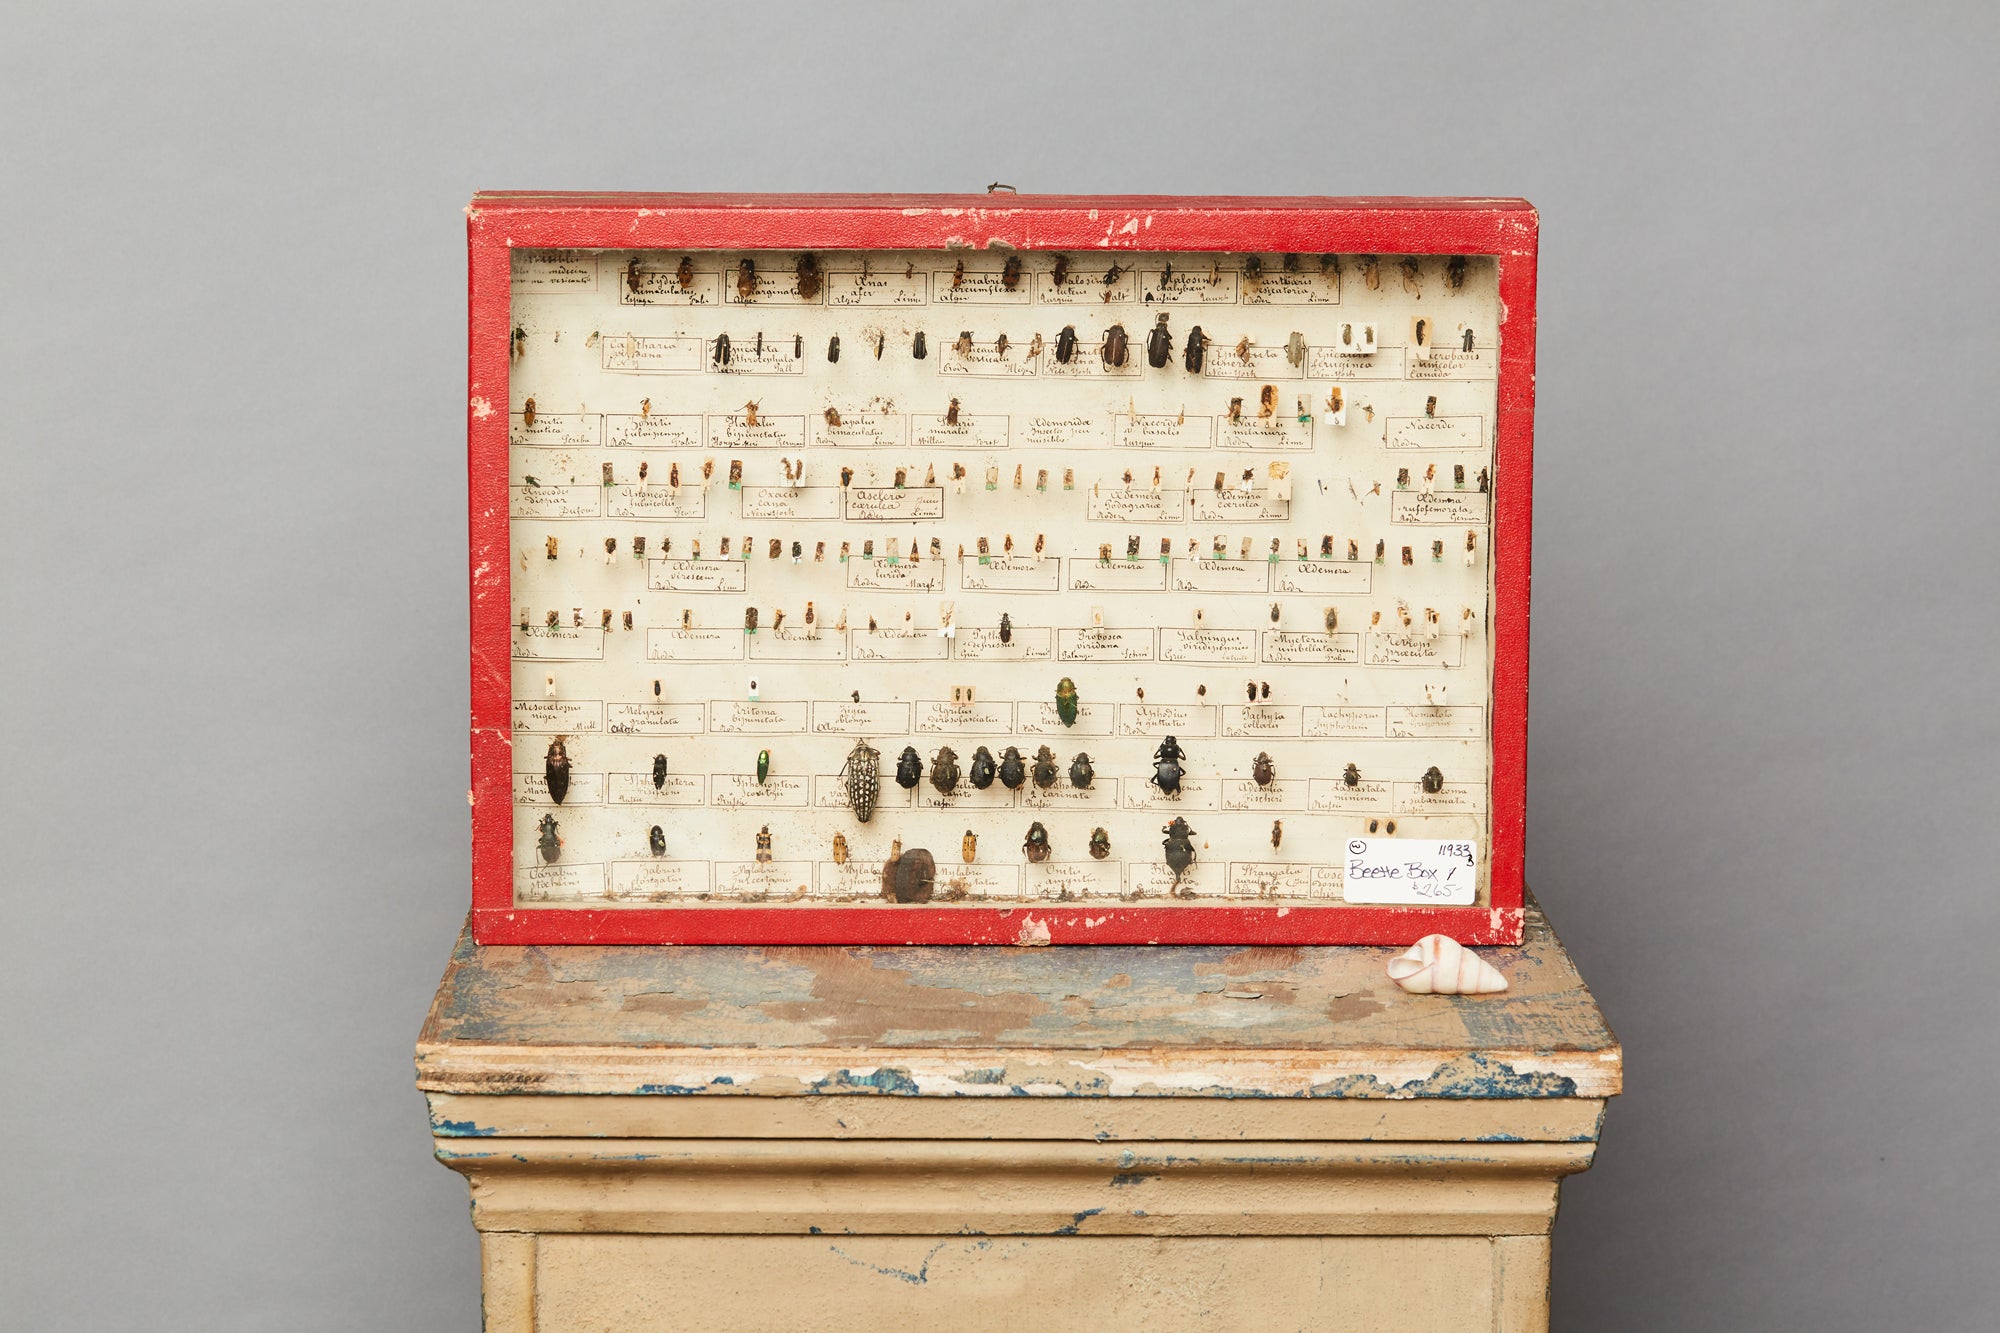 French Beetle Collection from Avignon